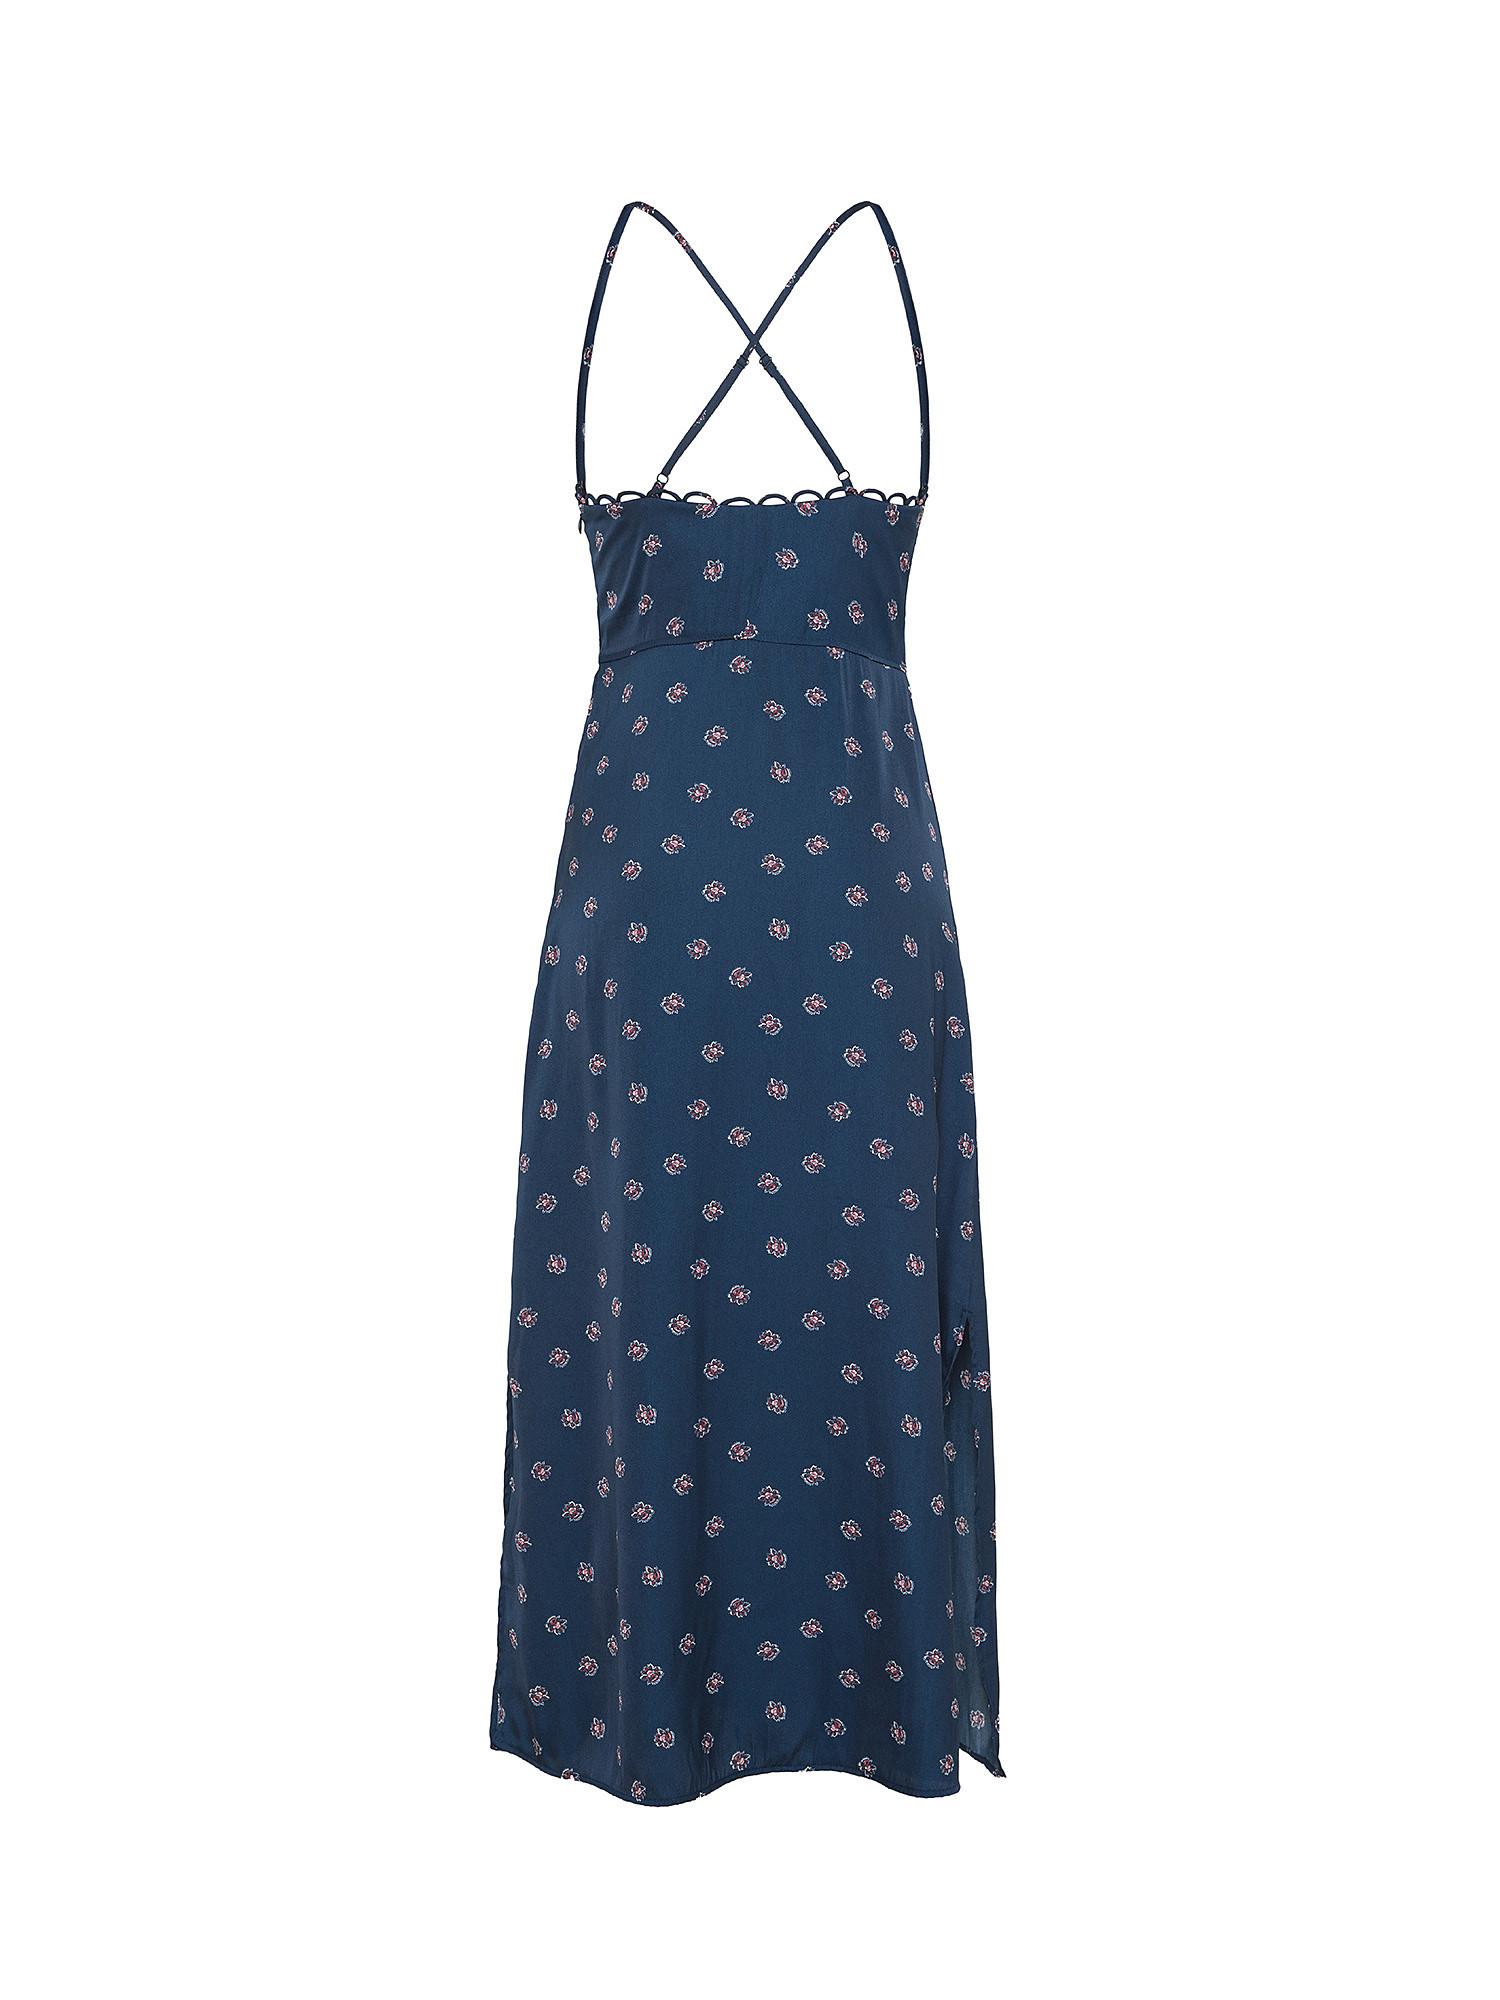 Pepe Jeans - Dress with floral print, Dark Blue, large image number 1